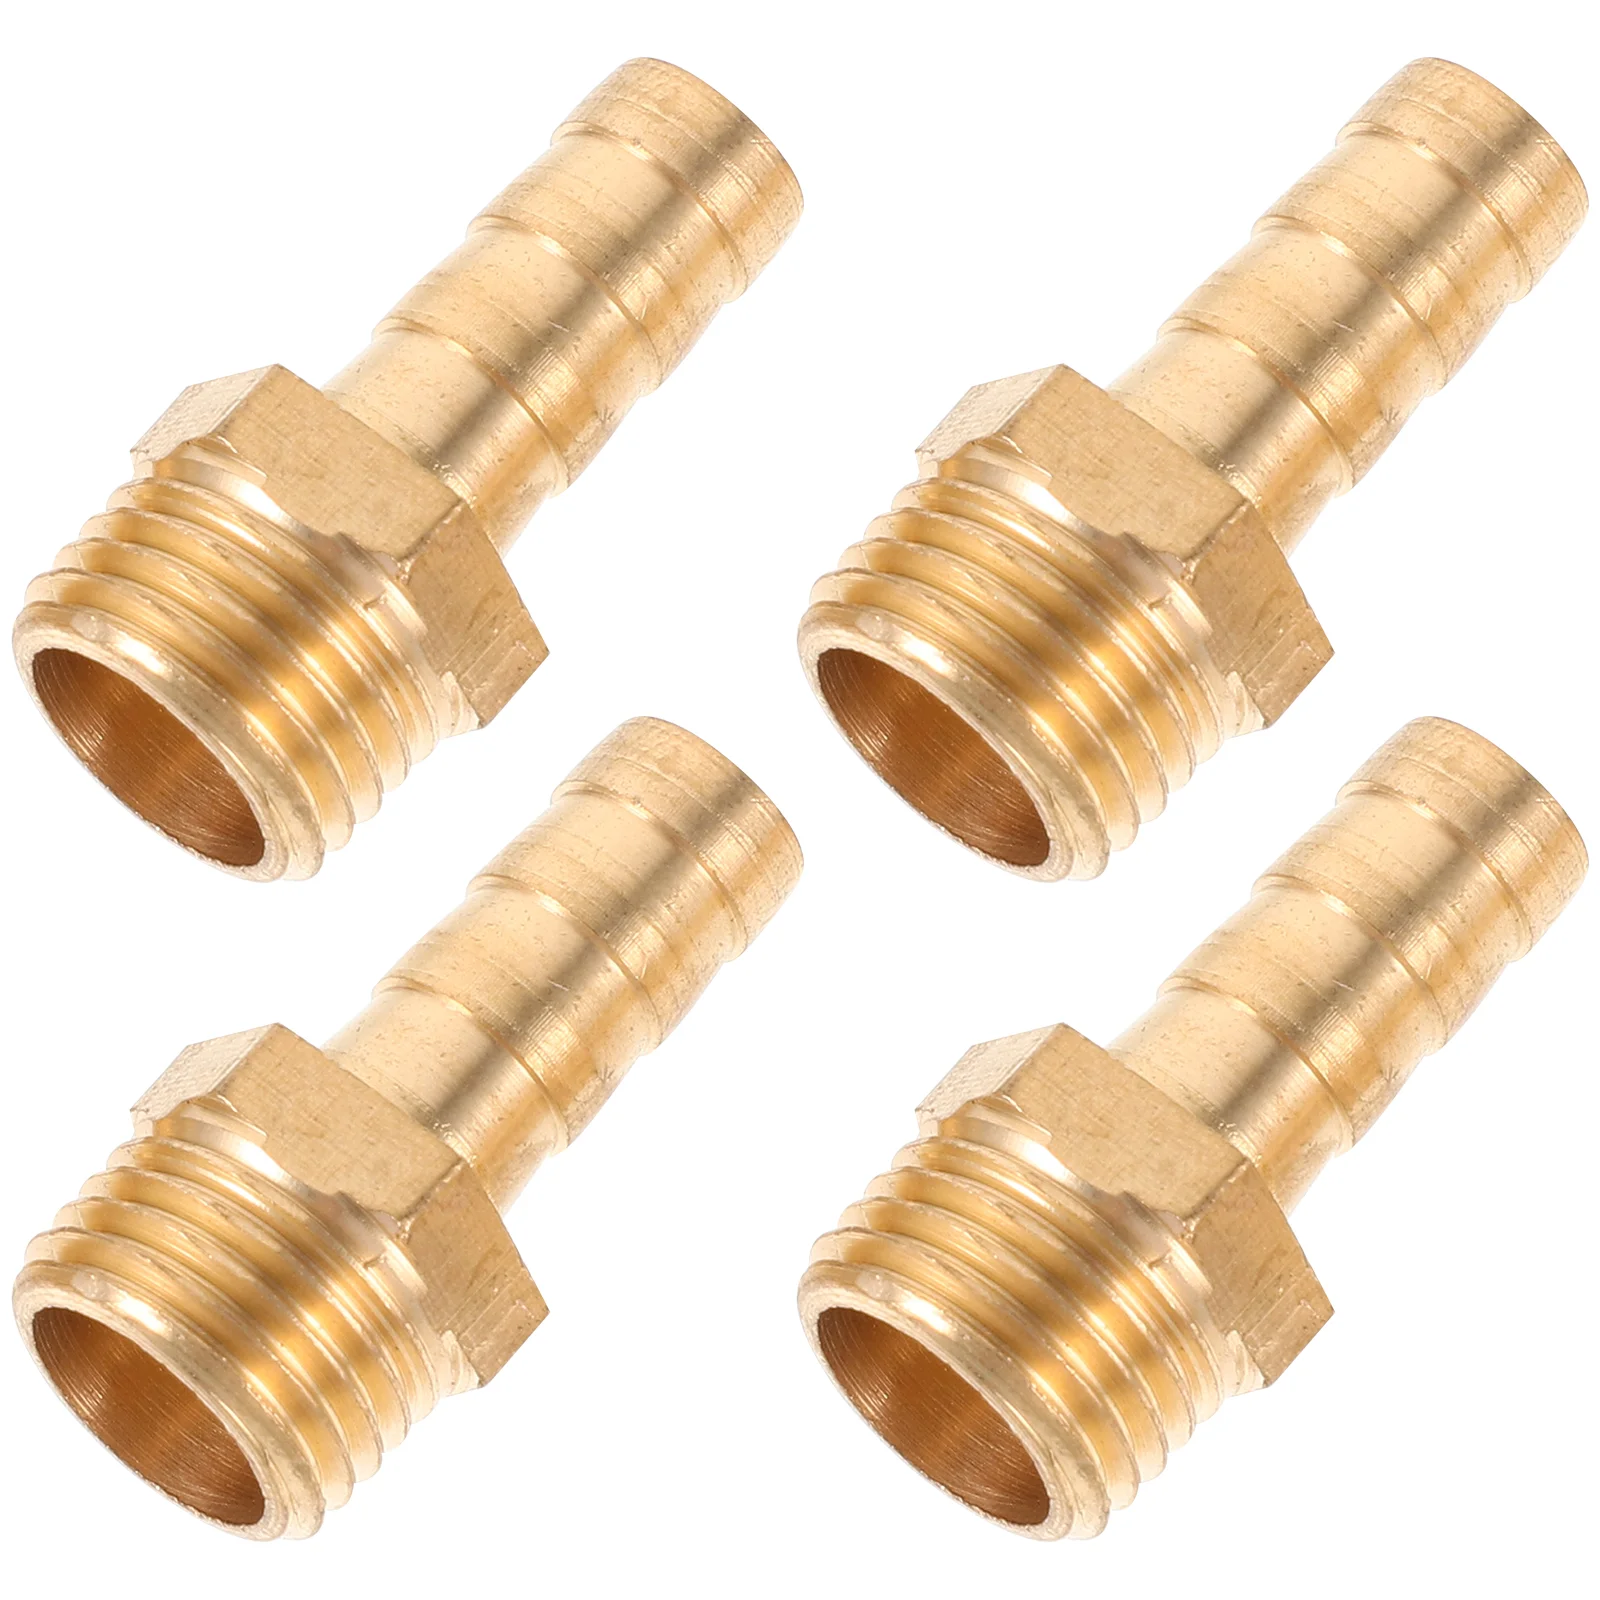 

4pcs Pipe Fitting Straight Barb Fitting 031 x 1/4 inch Air Pipe Connector